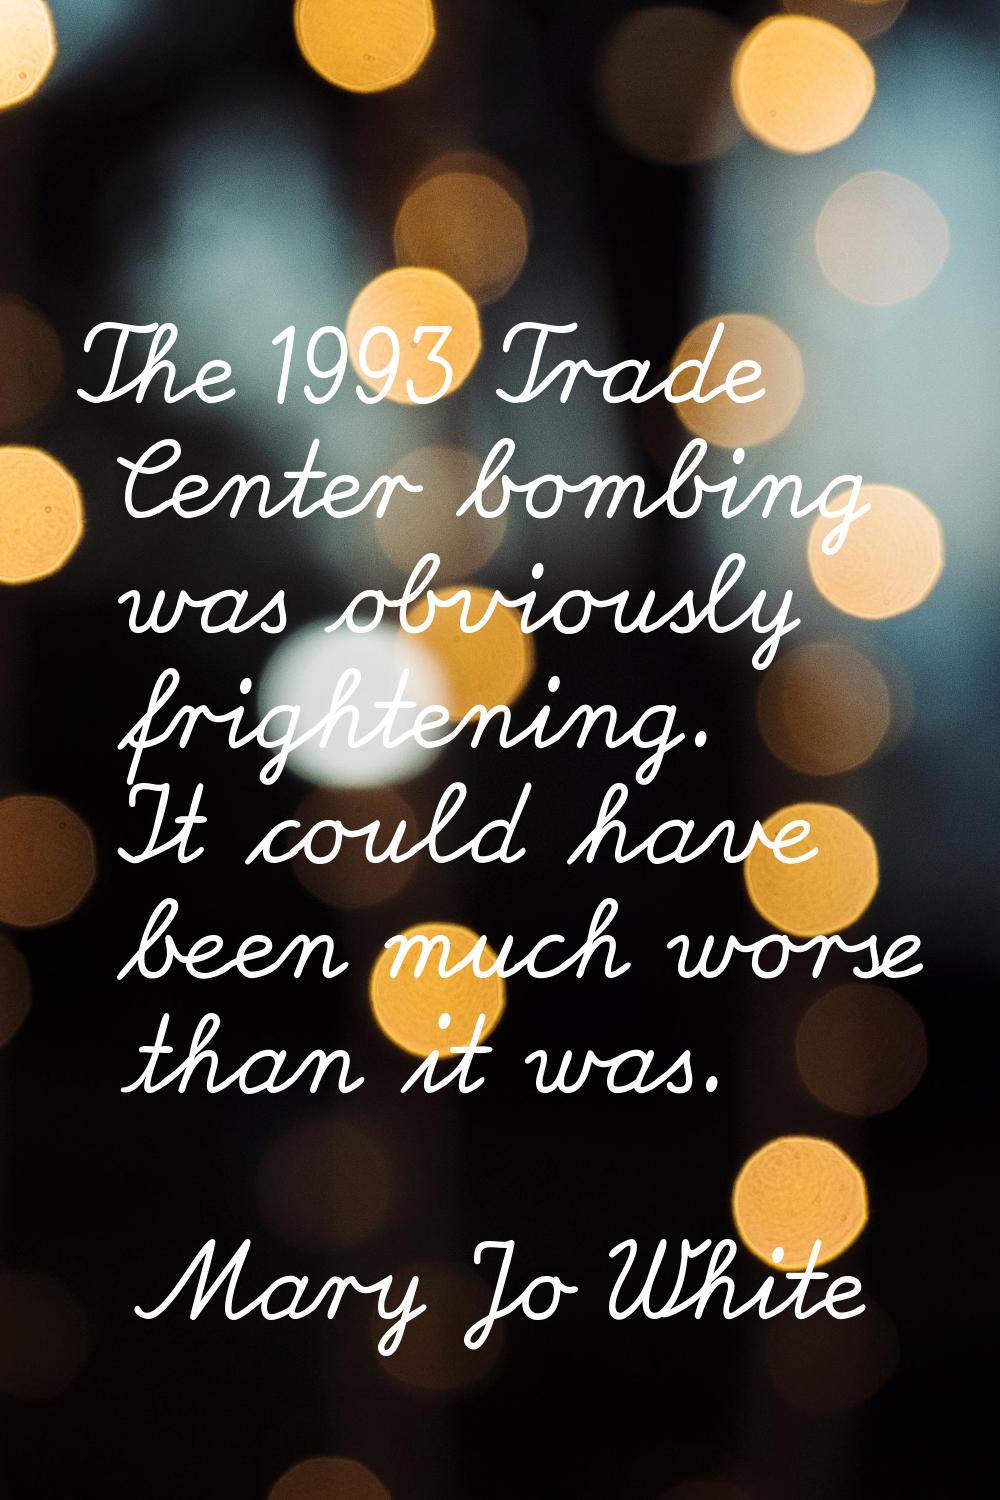 The 1993 Trade Center bombing was obviously frightening. It could have been much worse than it was.